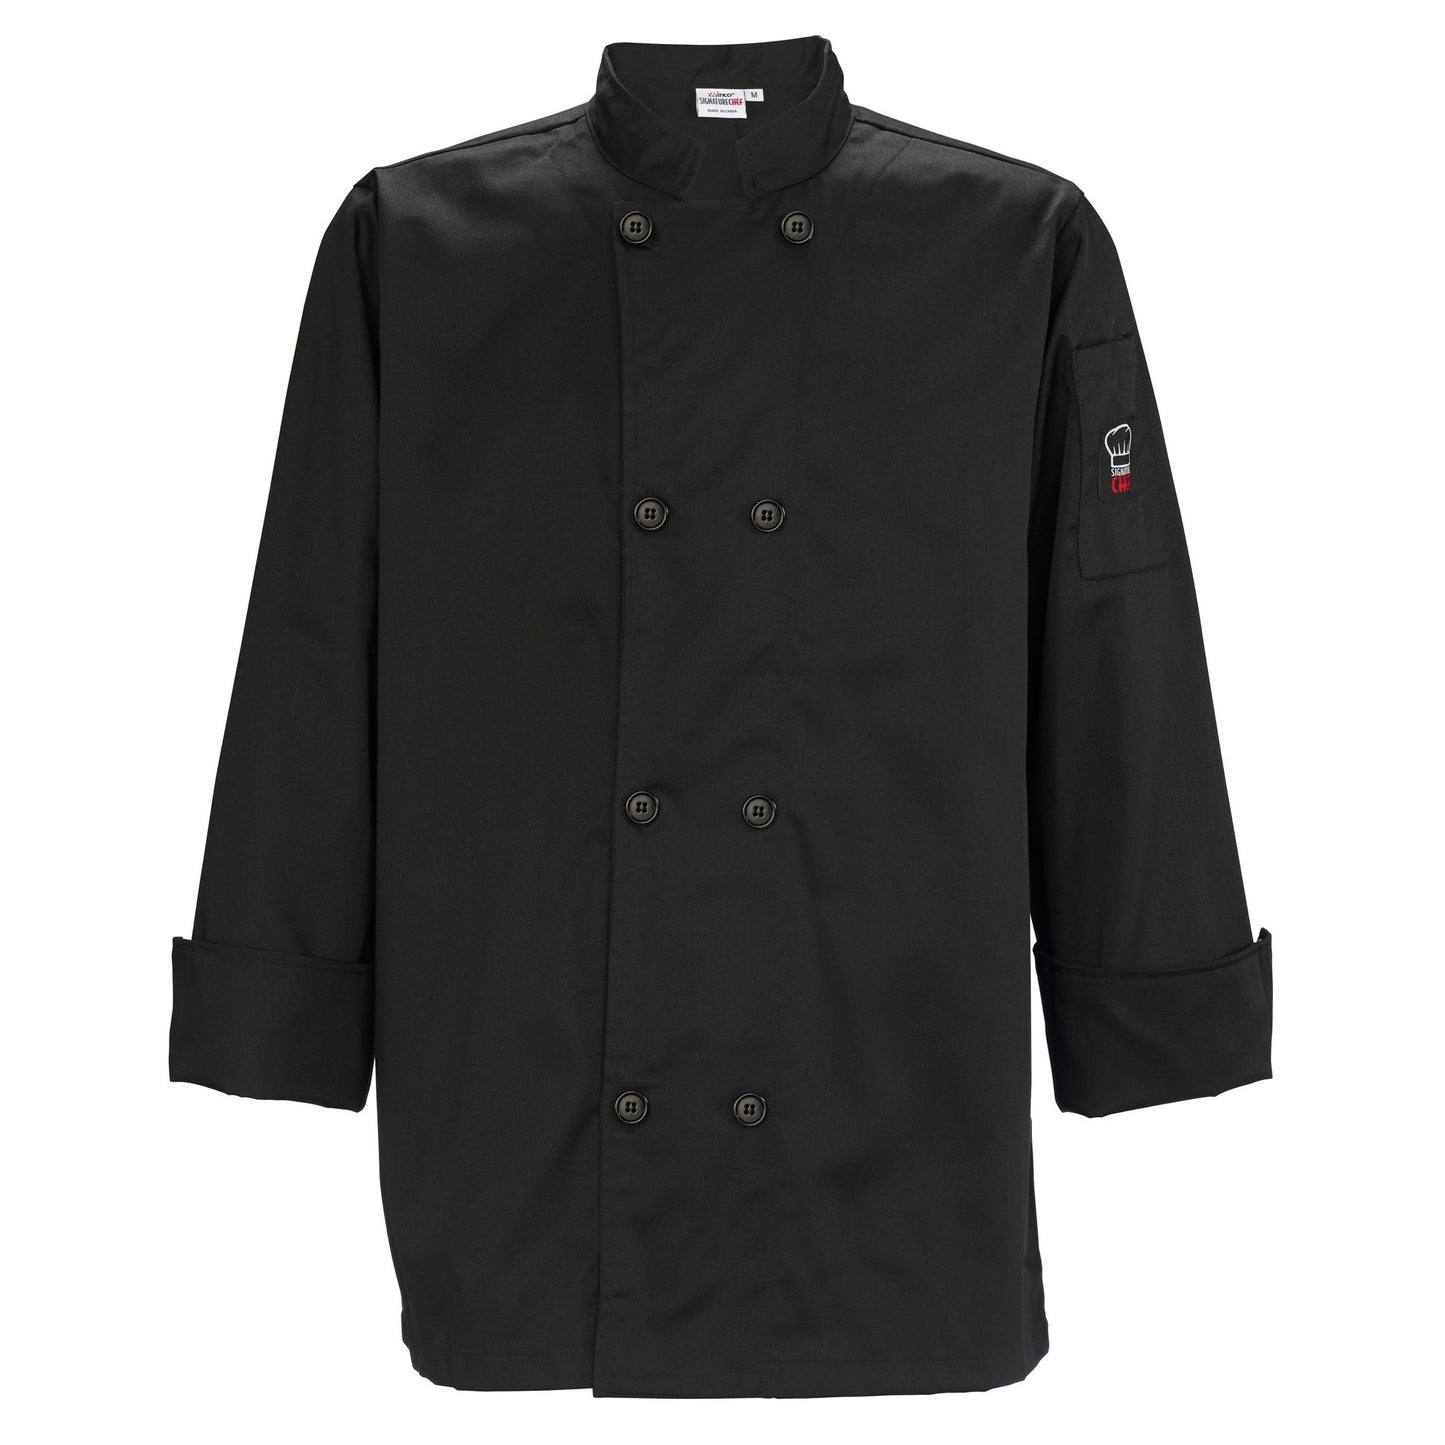 UNF-6K4XL - Men's Tapered Fit Chef Jacket